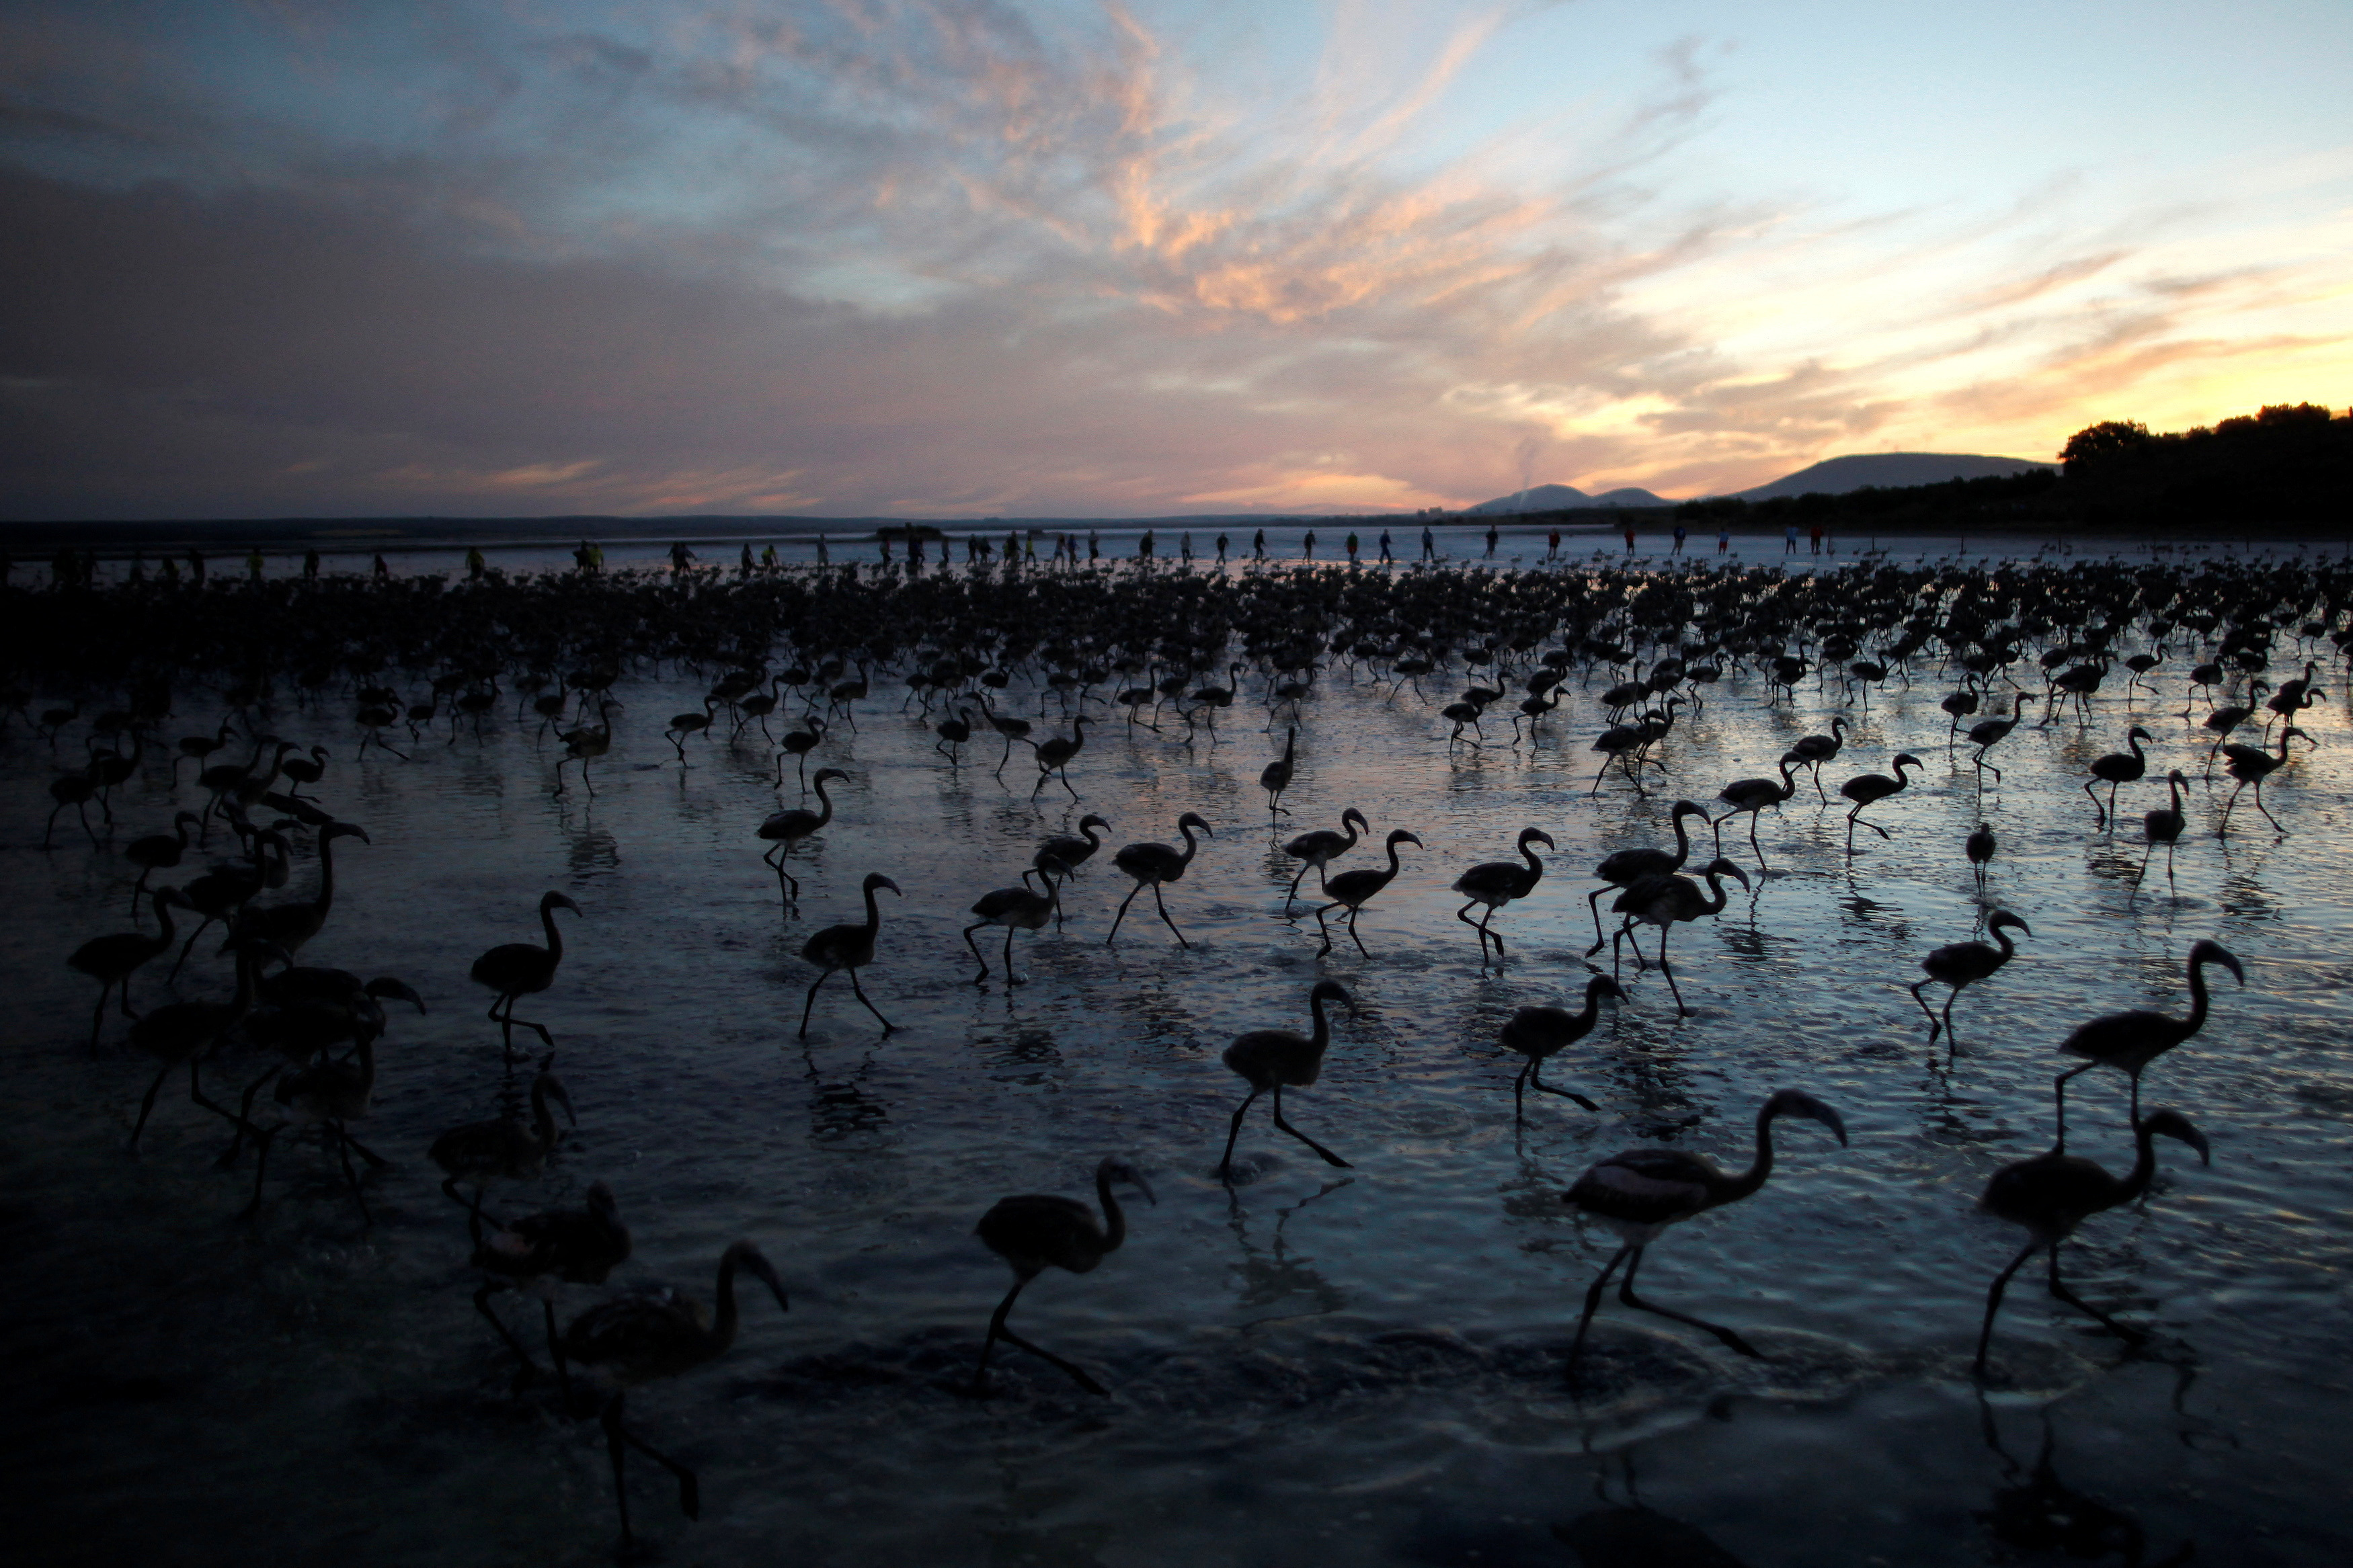 Volunteers wade across a lagoon at dawn to gather flamingo chicks and place them inside a corral at the Fuente de Piedra natural reserve